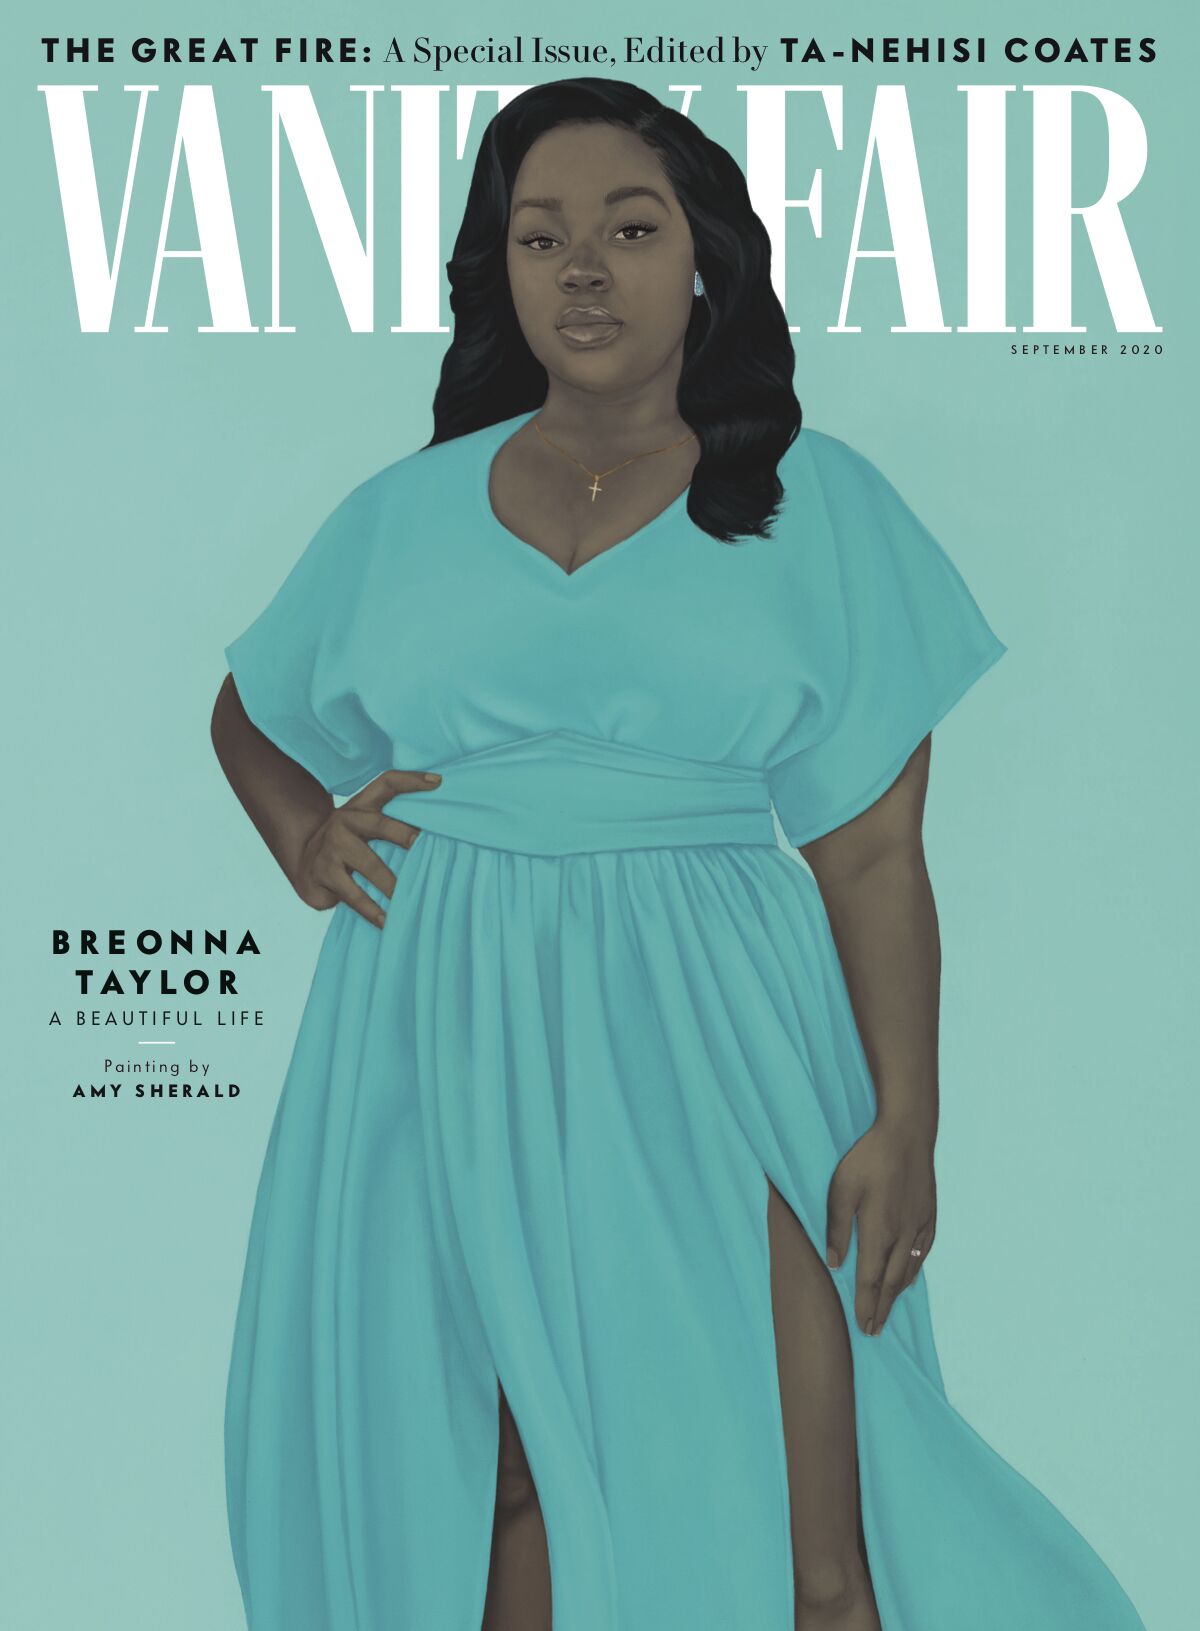 Breonna Taylor, painted by Amy Sherald for the cover of September's Vanity Fair.